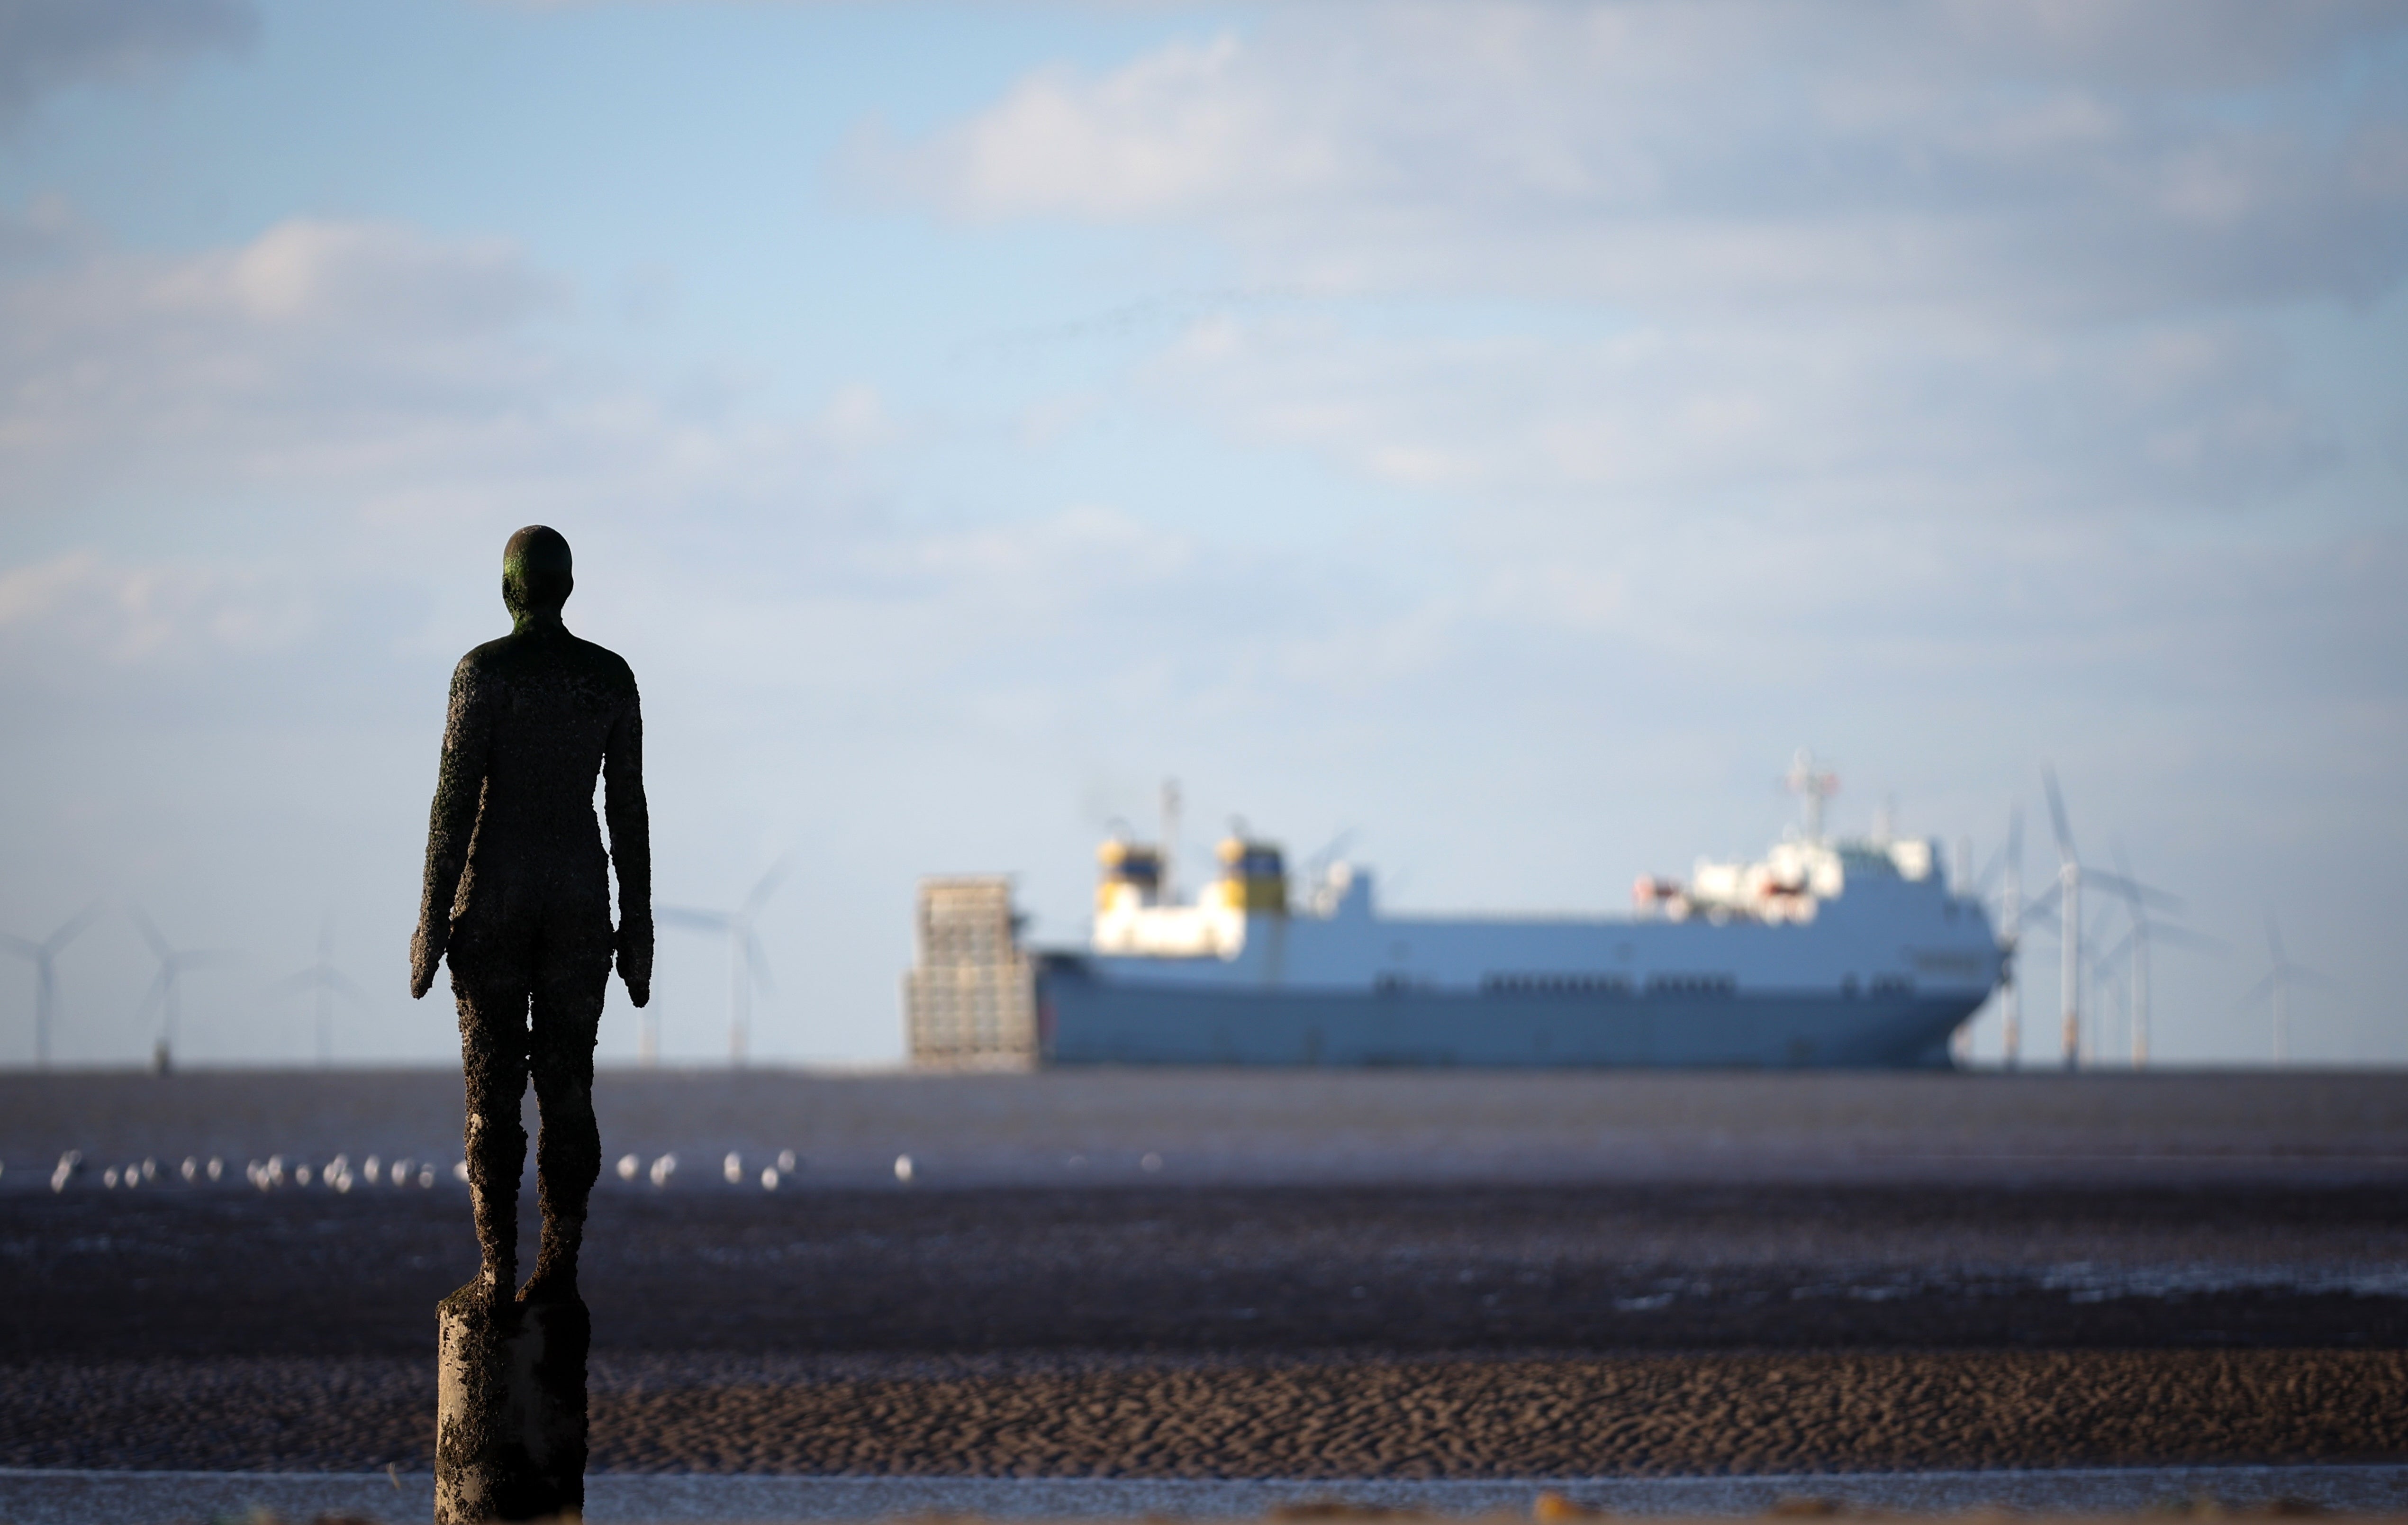 Antony Gormley: ‘Art is, in a way, the trace we leave of our hopes and our fears’